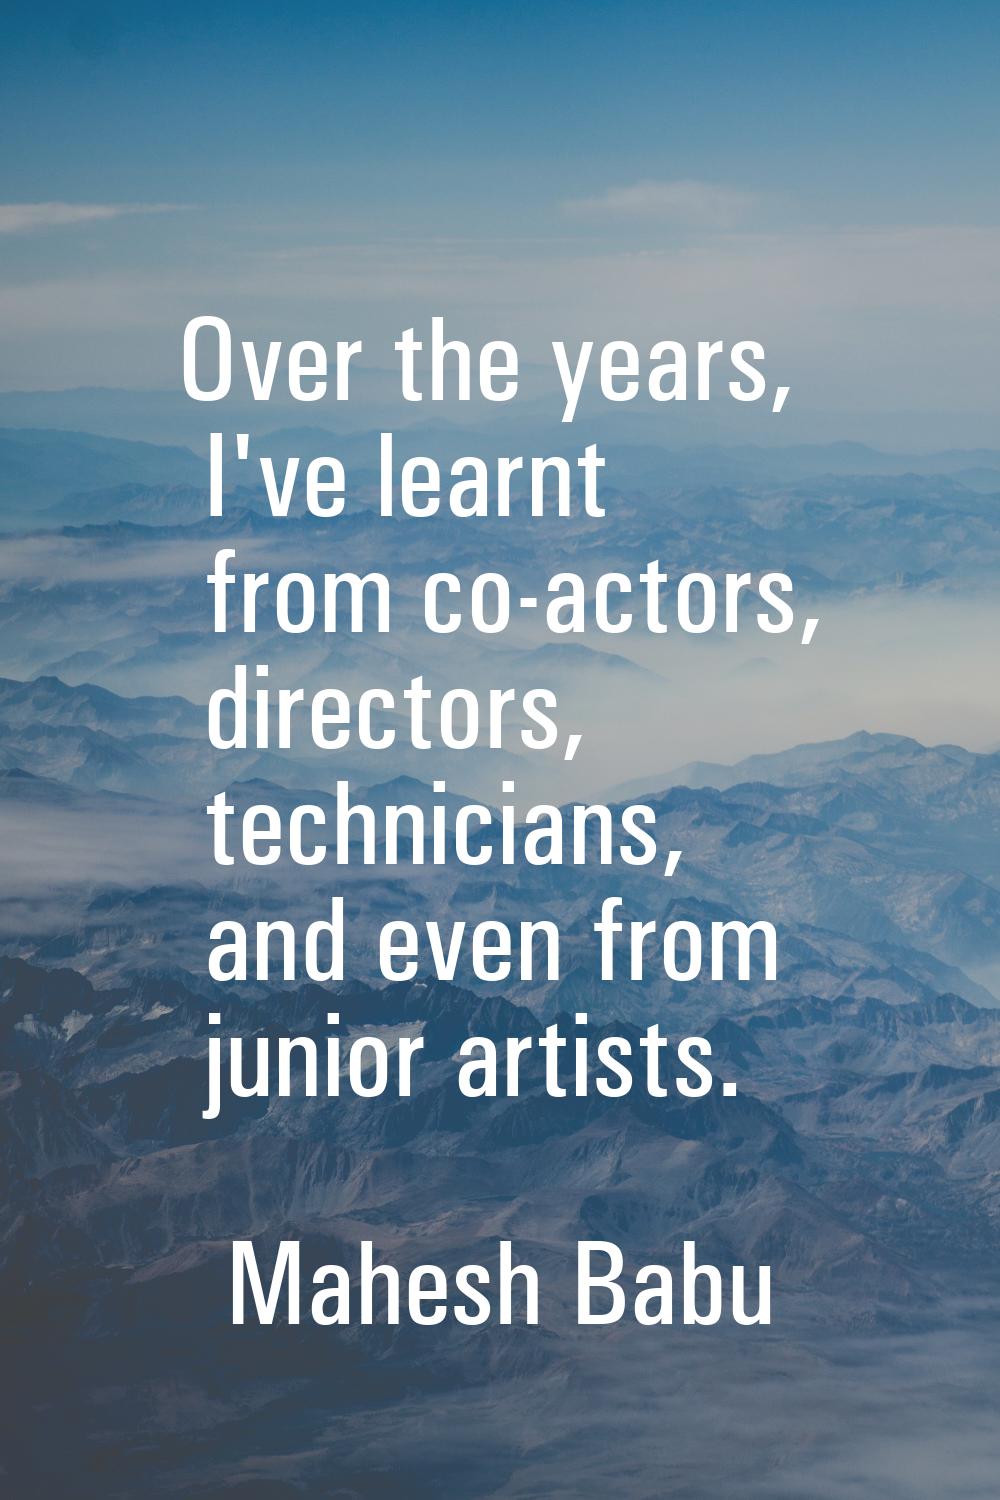 Over the years, I've learnt from co-actors, directors, technicians, and even from junior artists.